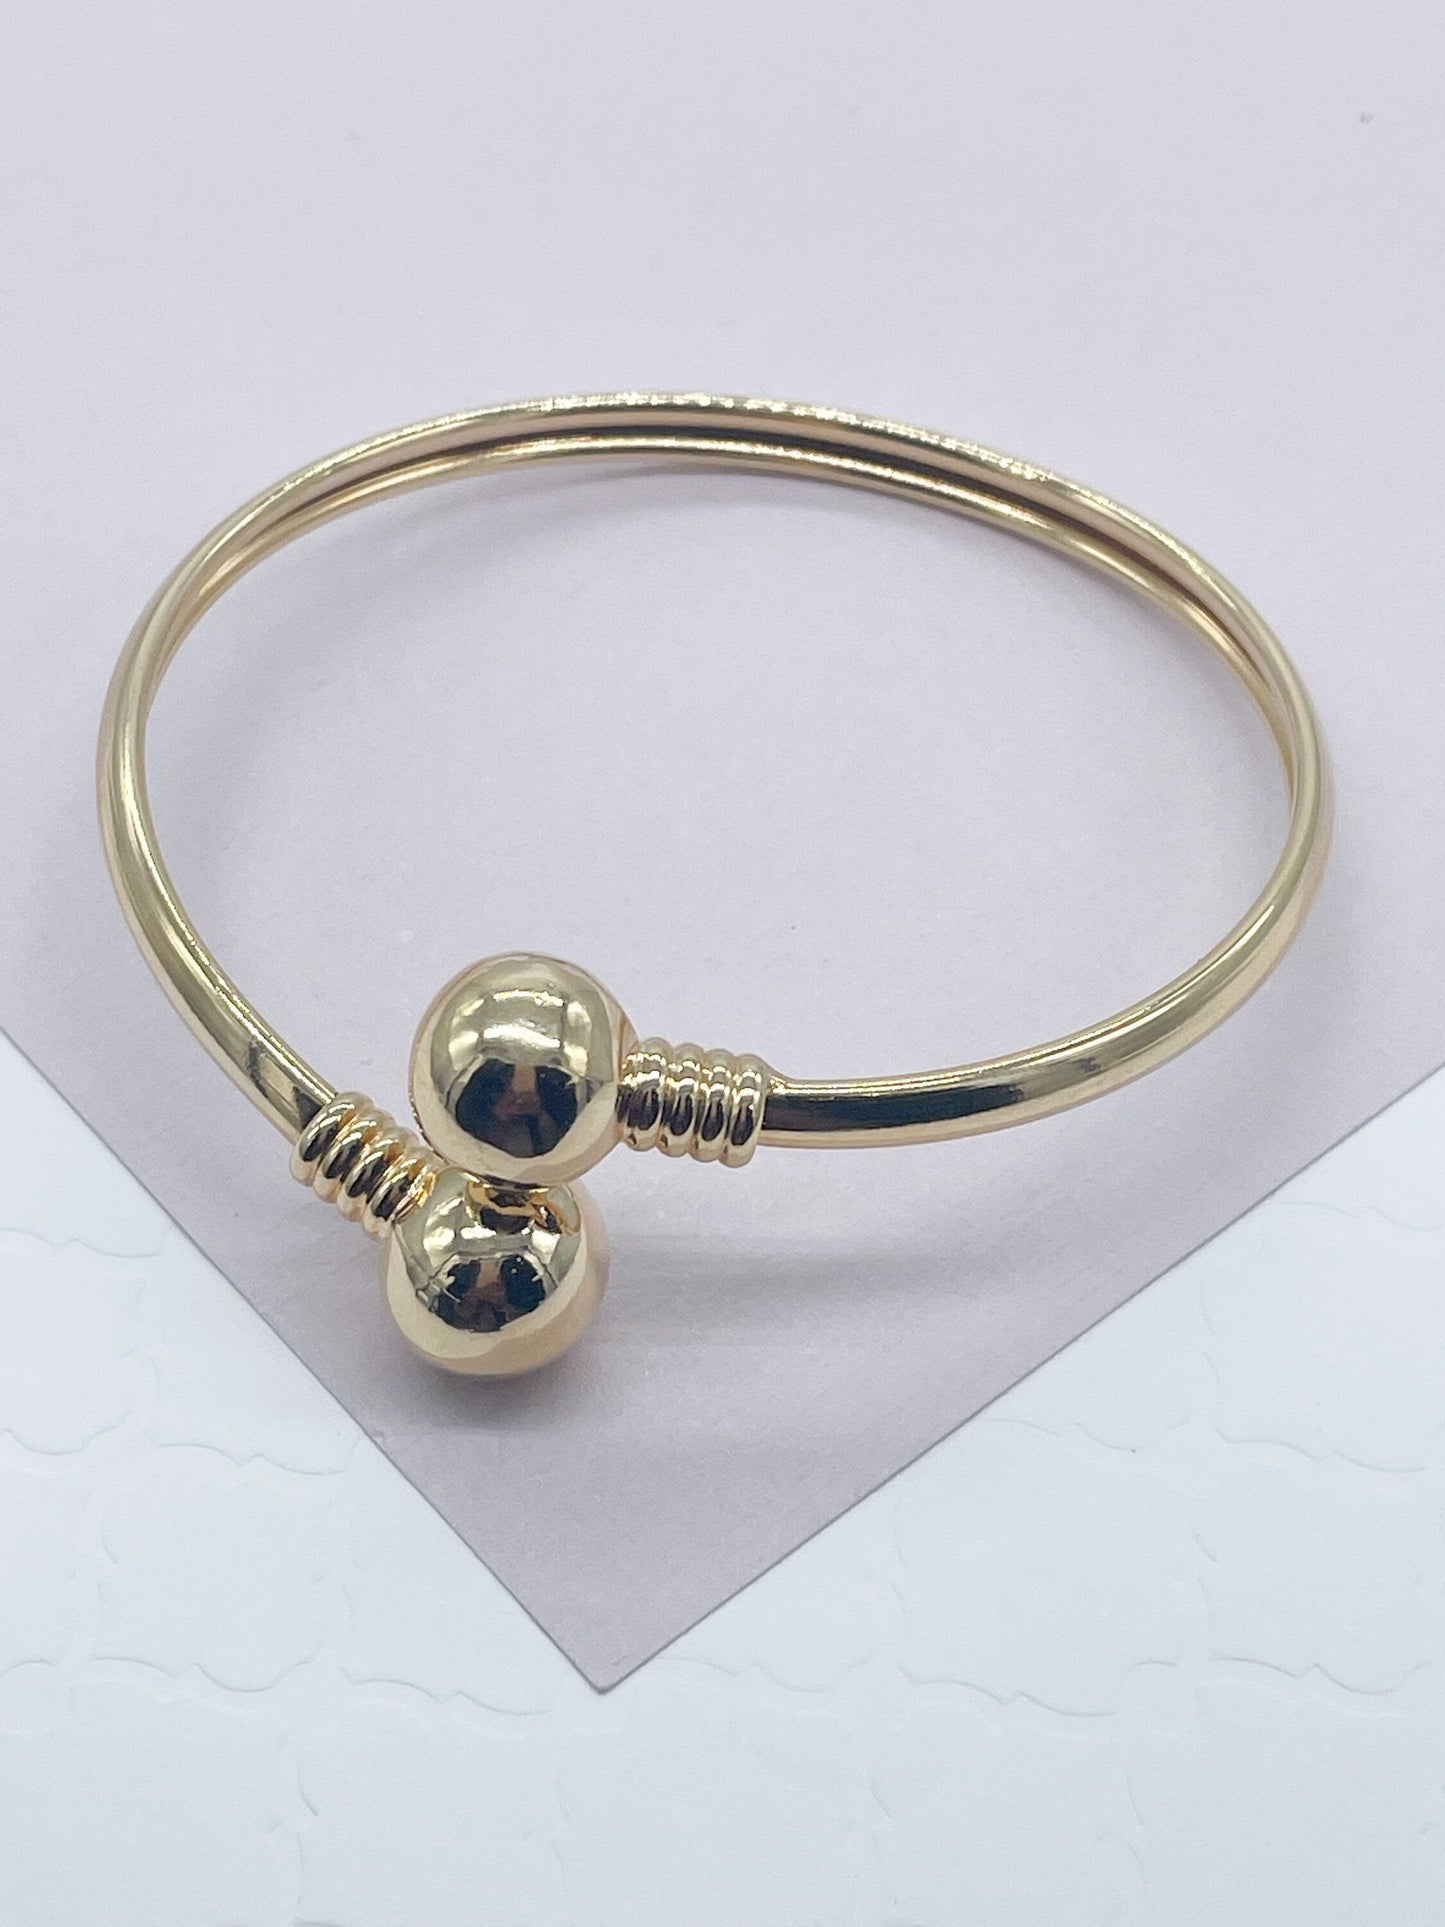 18k Gold Layered Plain Cuff Bangle Featuring Two Solid Gold Layered Ball Wholesale